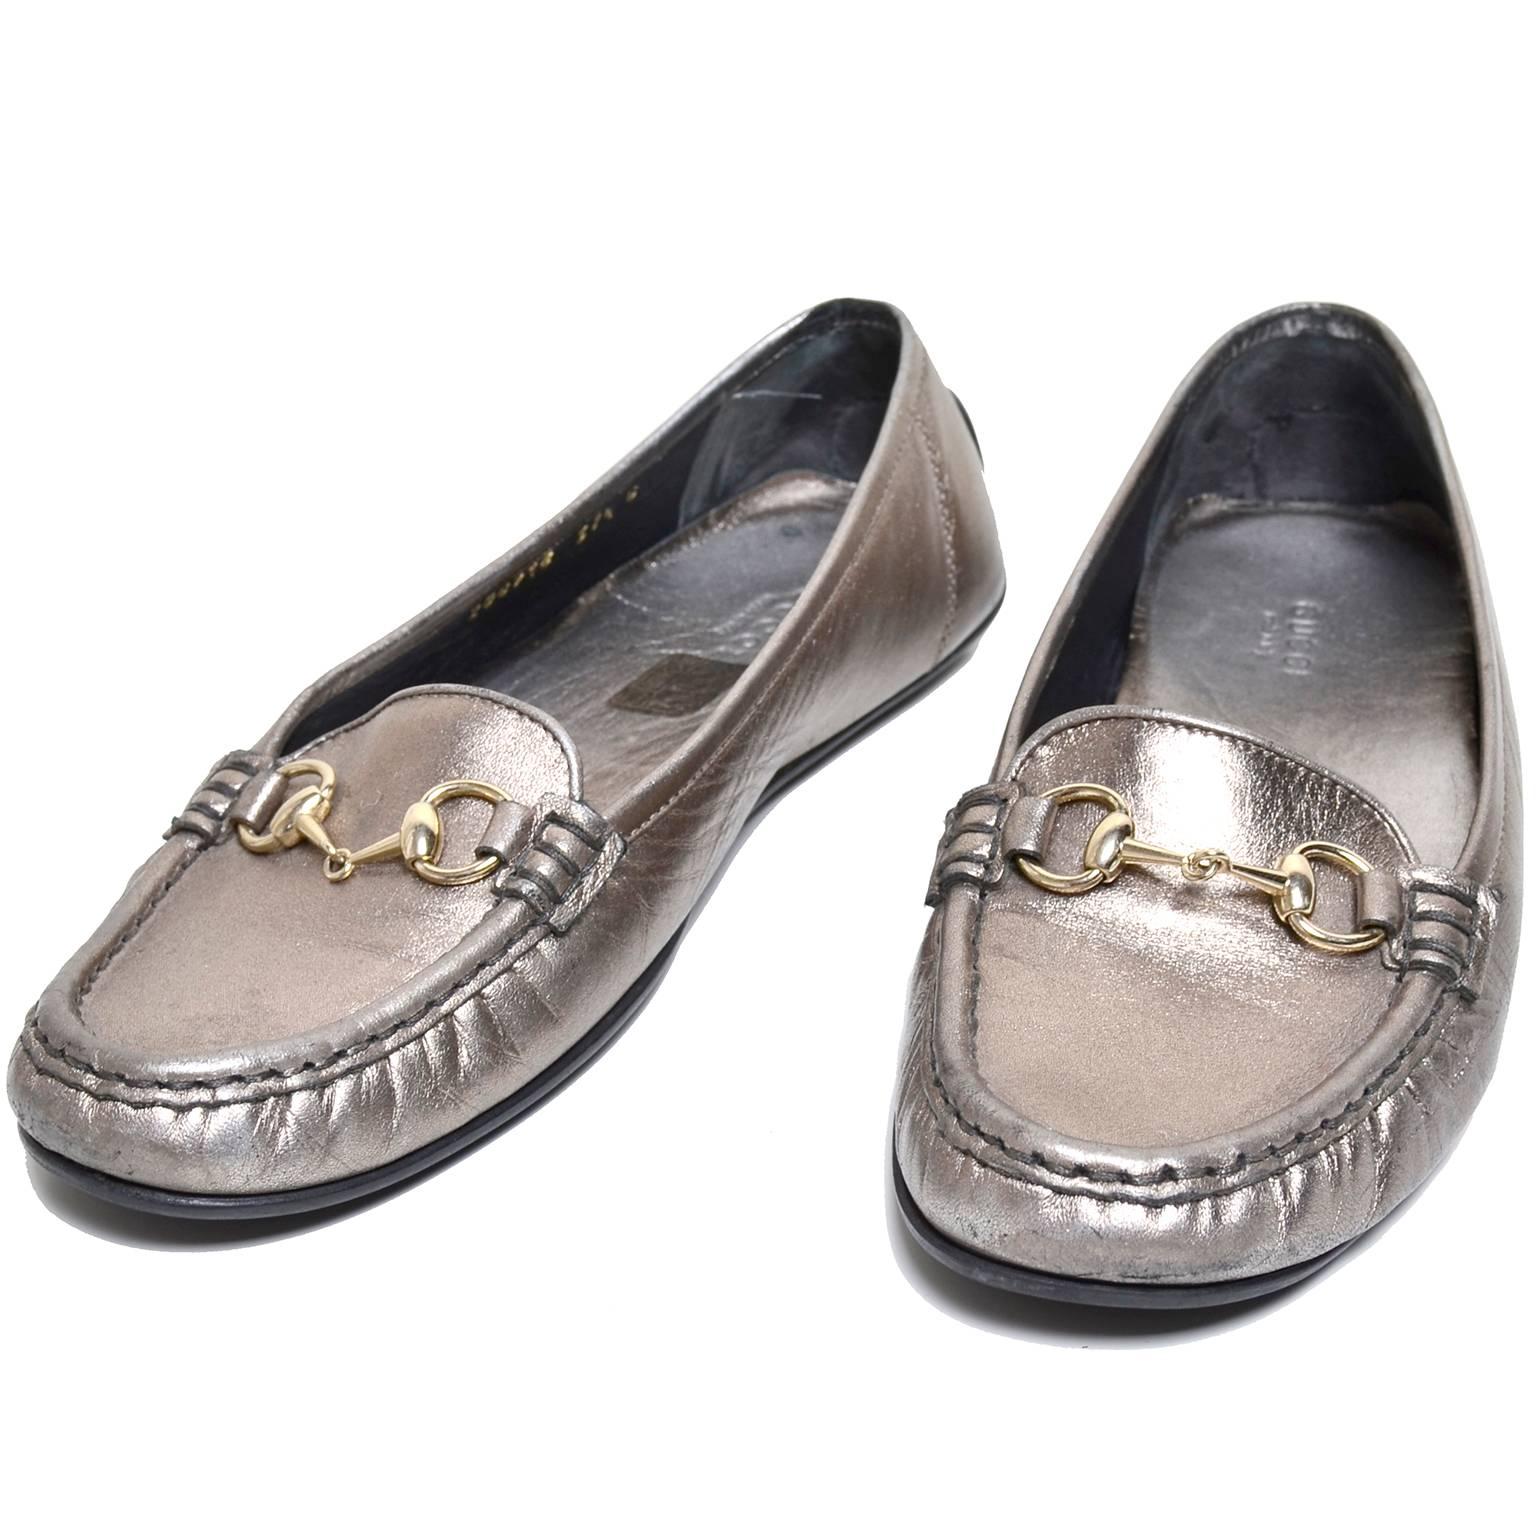 These are adorable metallic slip on loafers by Gucci. These drivers are metallic silver, with a slight gold cast. They have silver hardware across the upper, with the classic Gucci horse bit buckles. The soles are rubber, coming up on the heel with